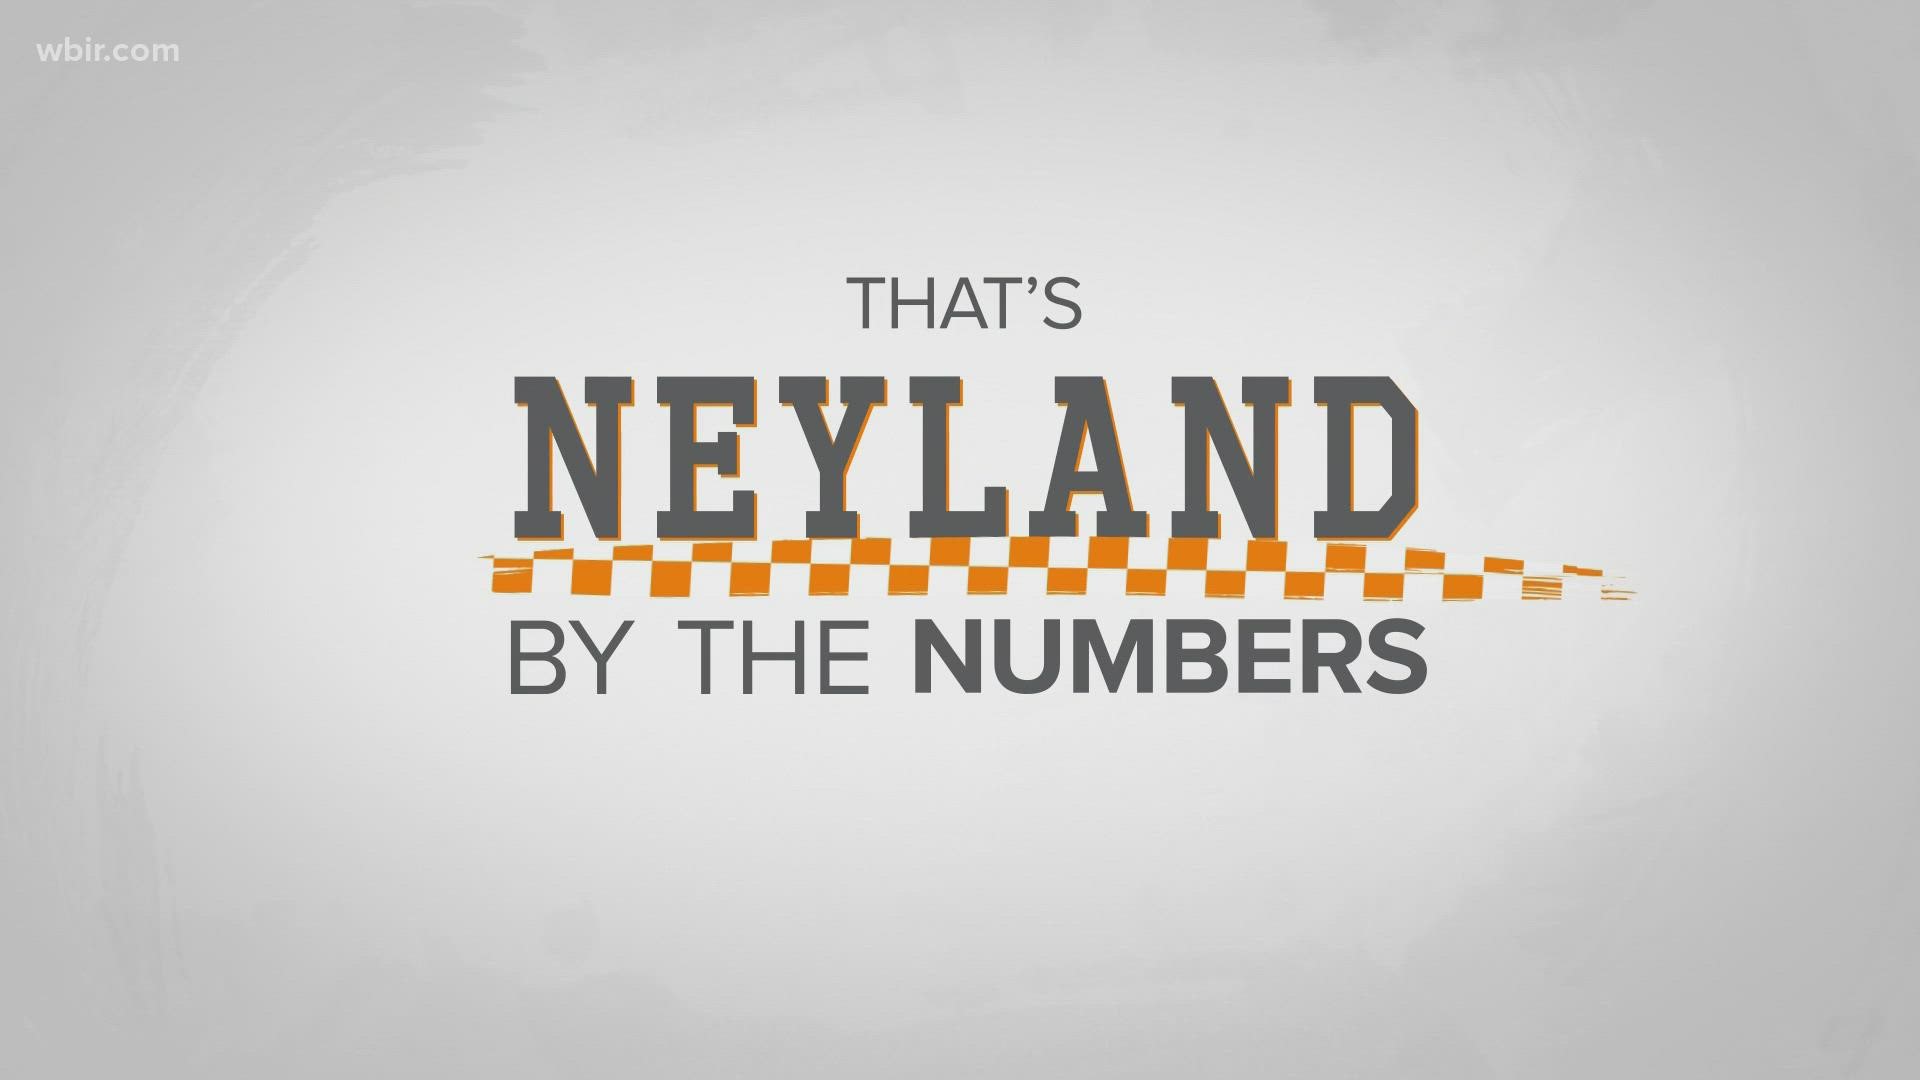 Since opening in 1921, Neyland Stadium has given the Vols a true home-field advantage.